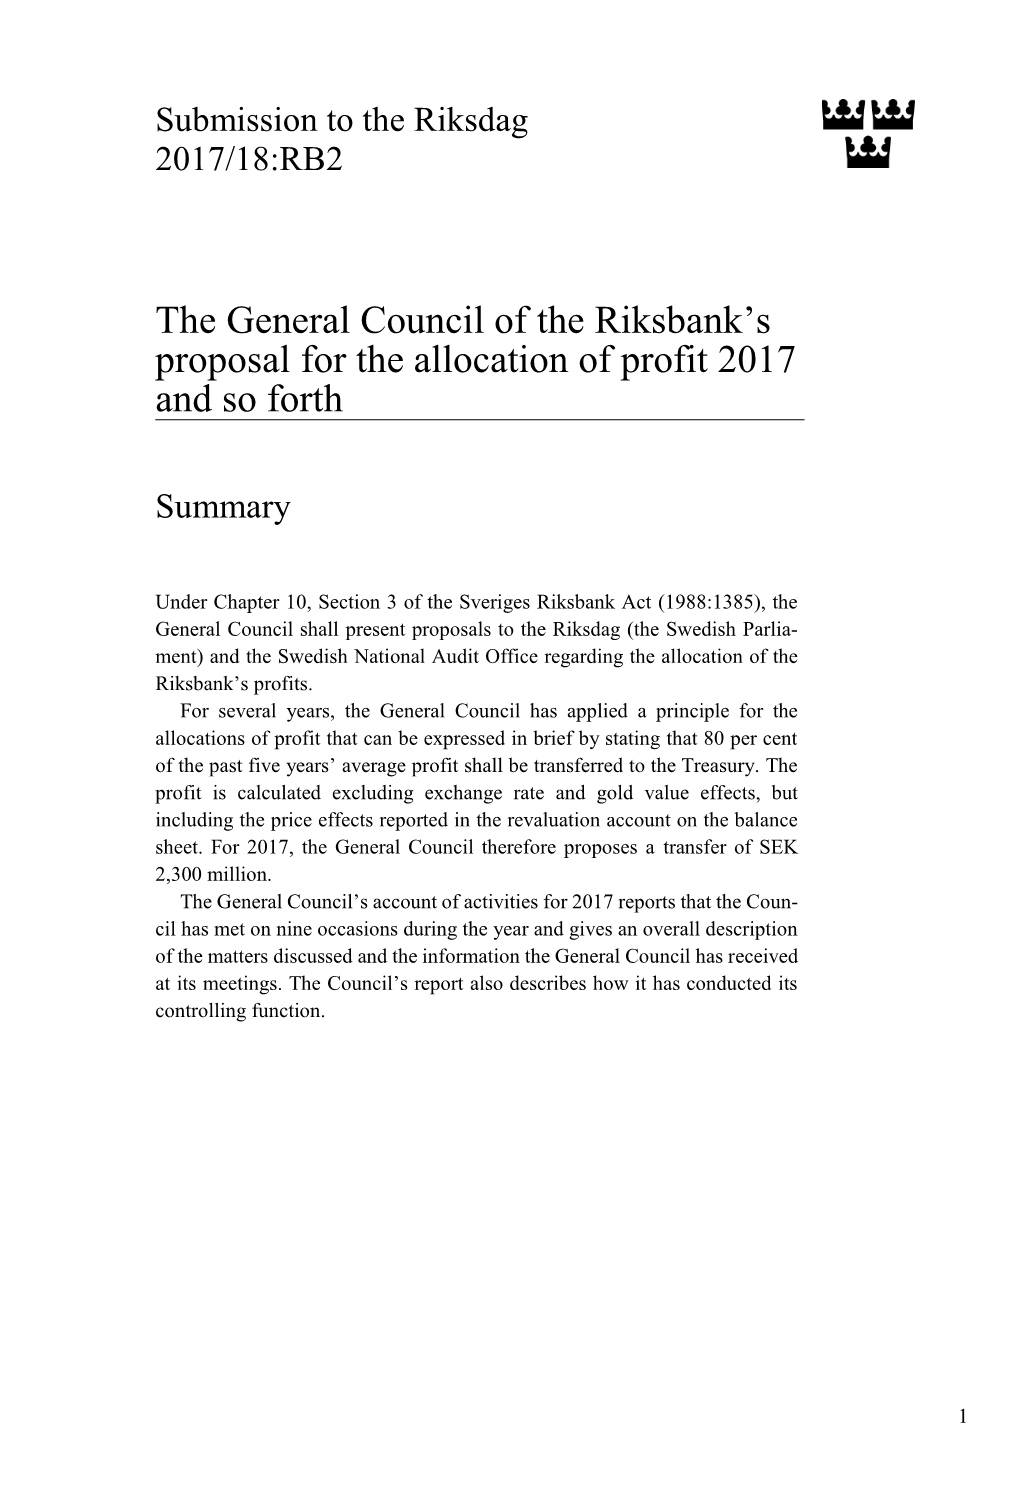 The General Council of the Riksbank's Proposal for the Allocation of Profit